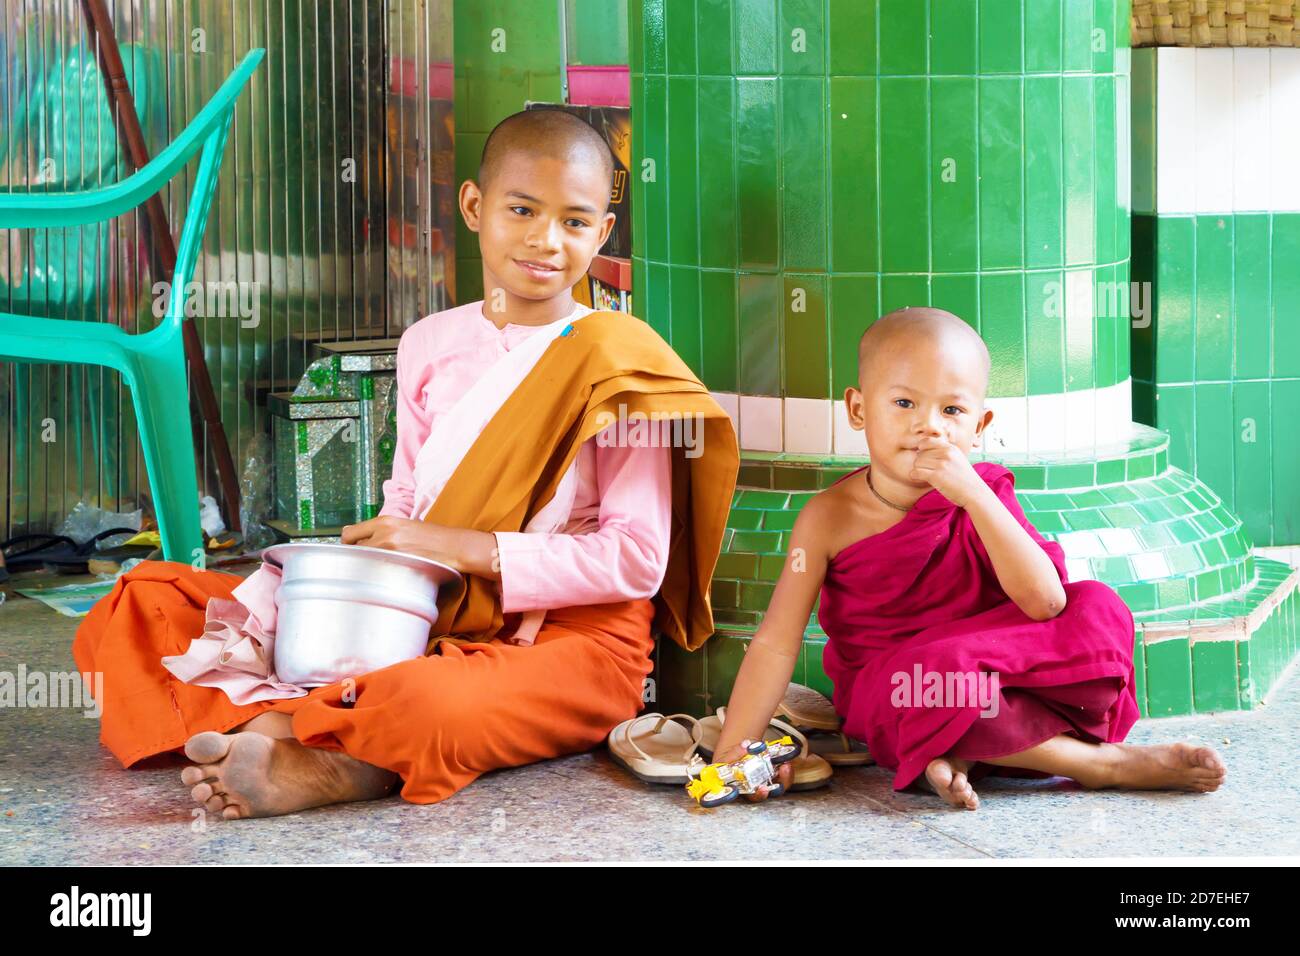 Elder girl and child dressed as buddhist nun and monk. They are sitting close to the column of a temple. Stock Photo